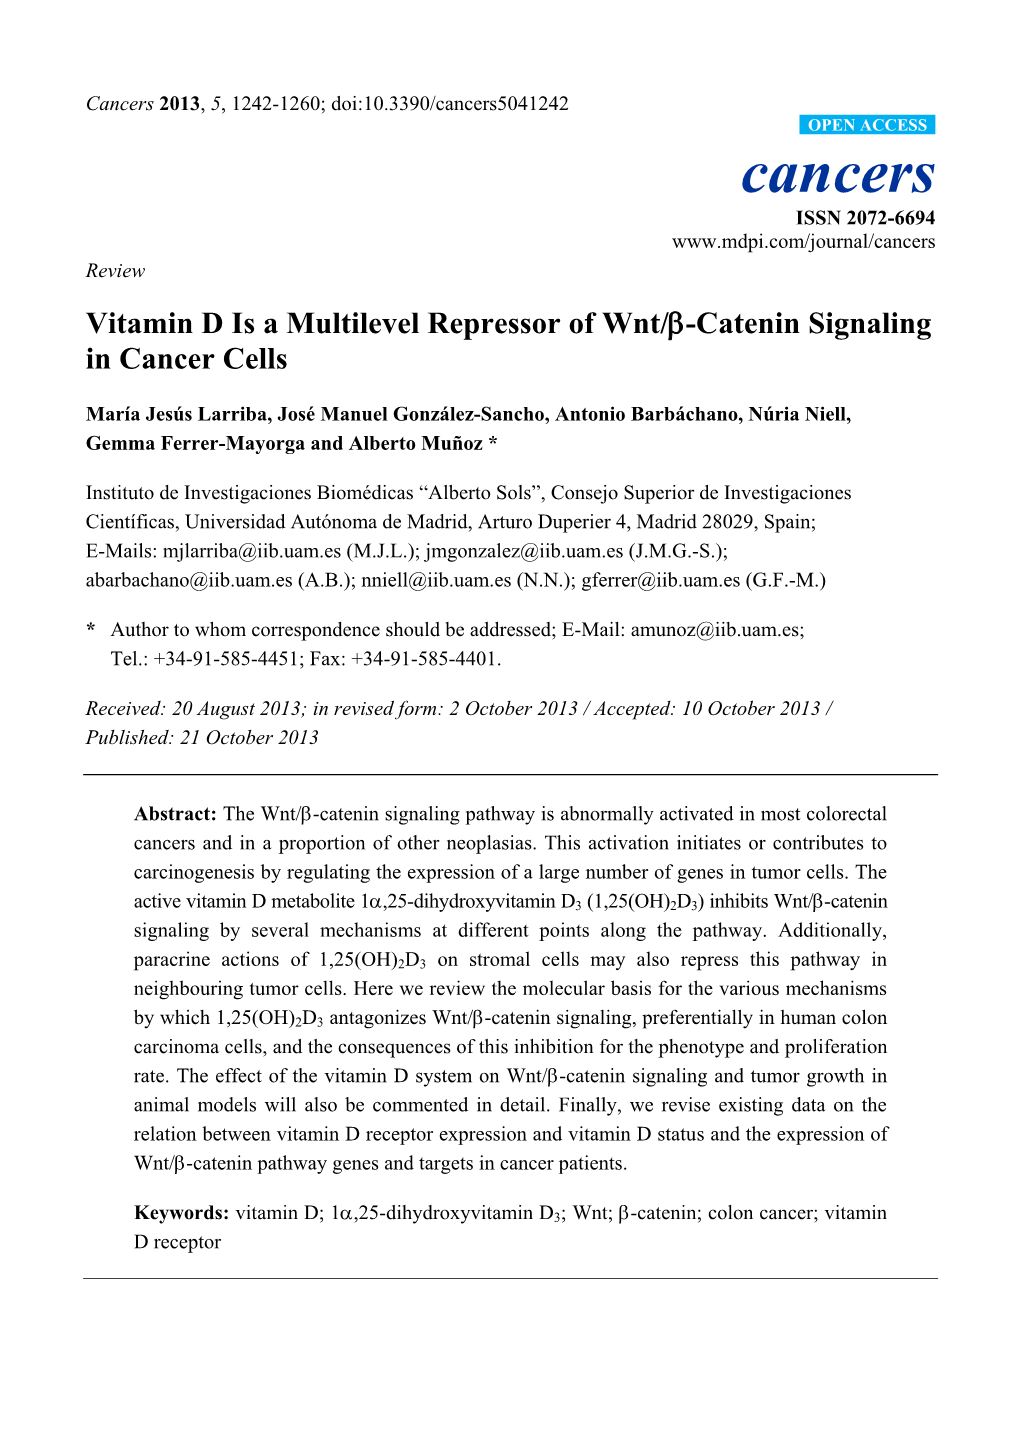 Vitamin D Is a Multilevel Repressor of Wnt/B-Catenin Signaling in Cancer